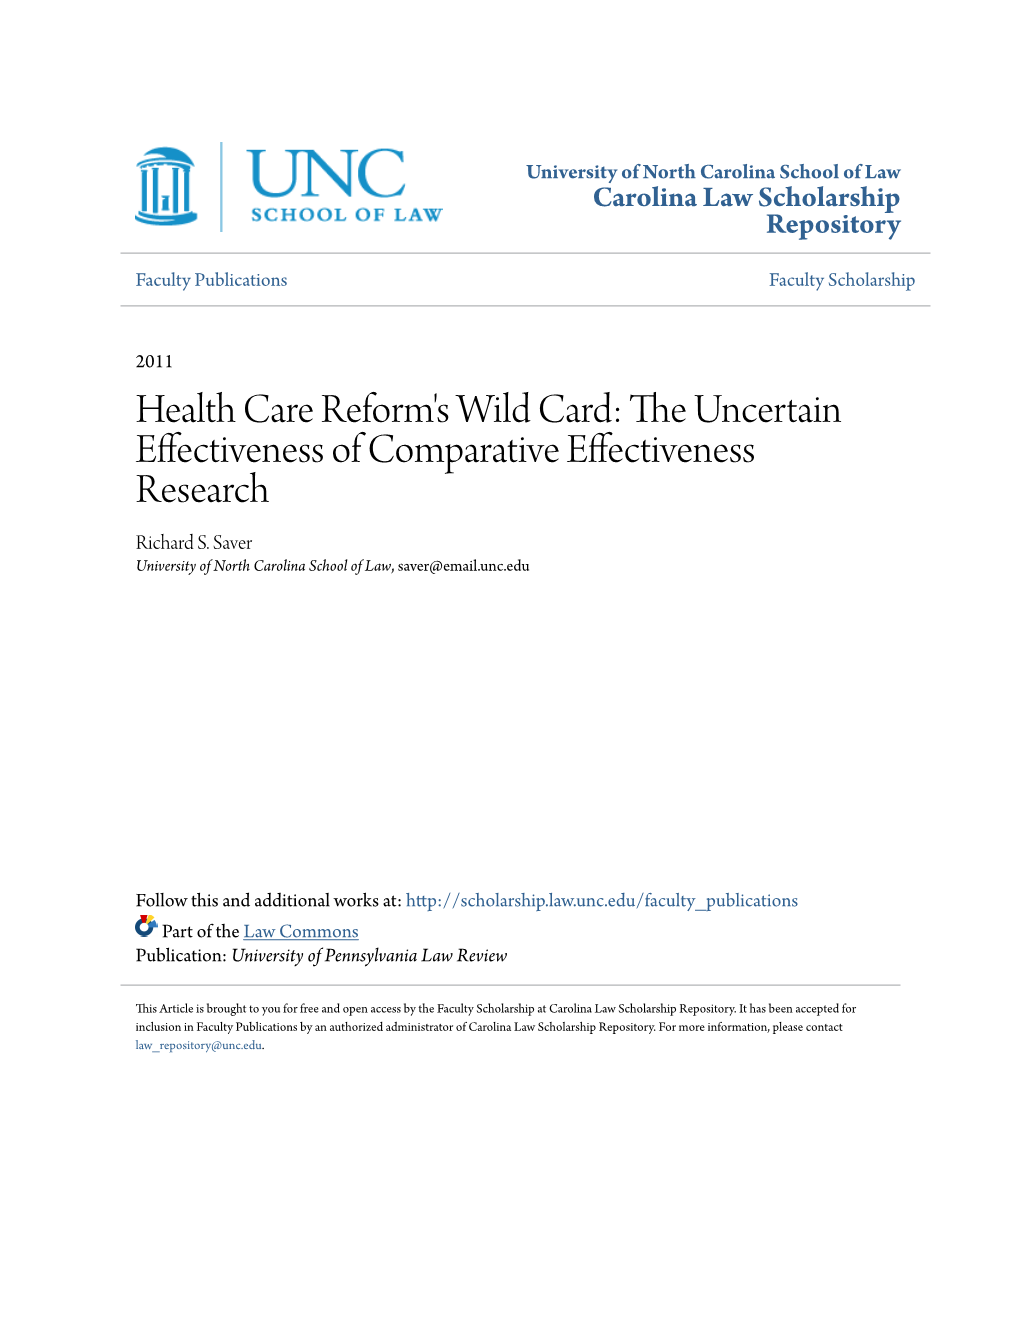 Health Care Reform's Wild Card: the Uncertain Effectiveness Of